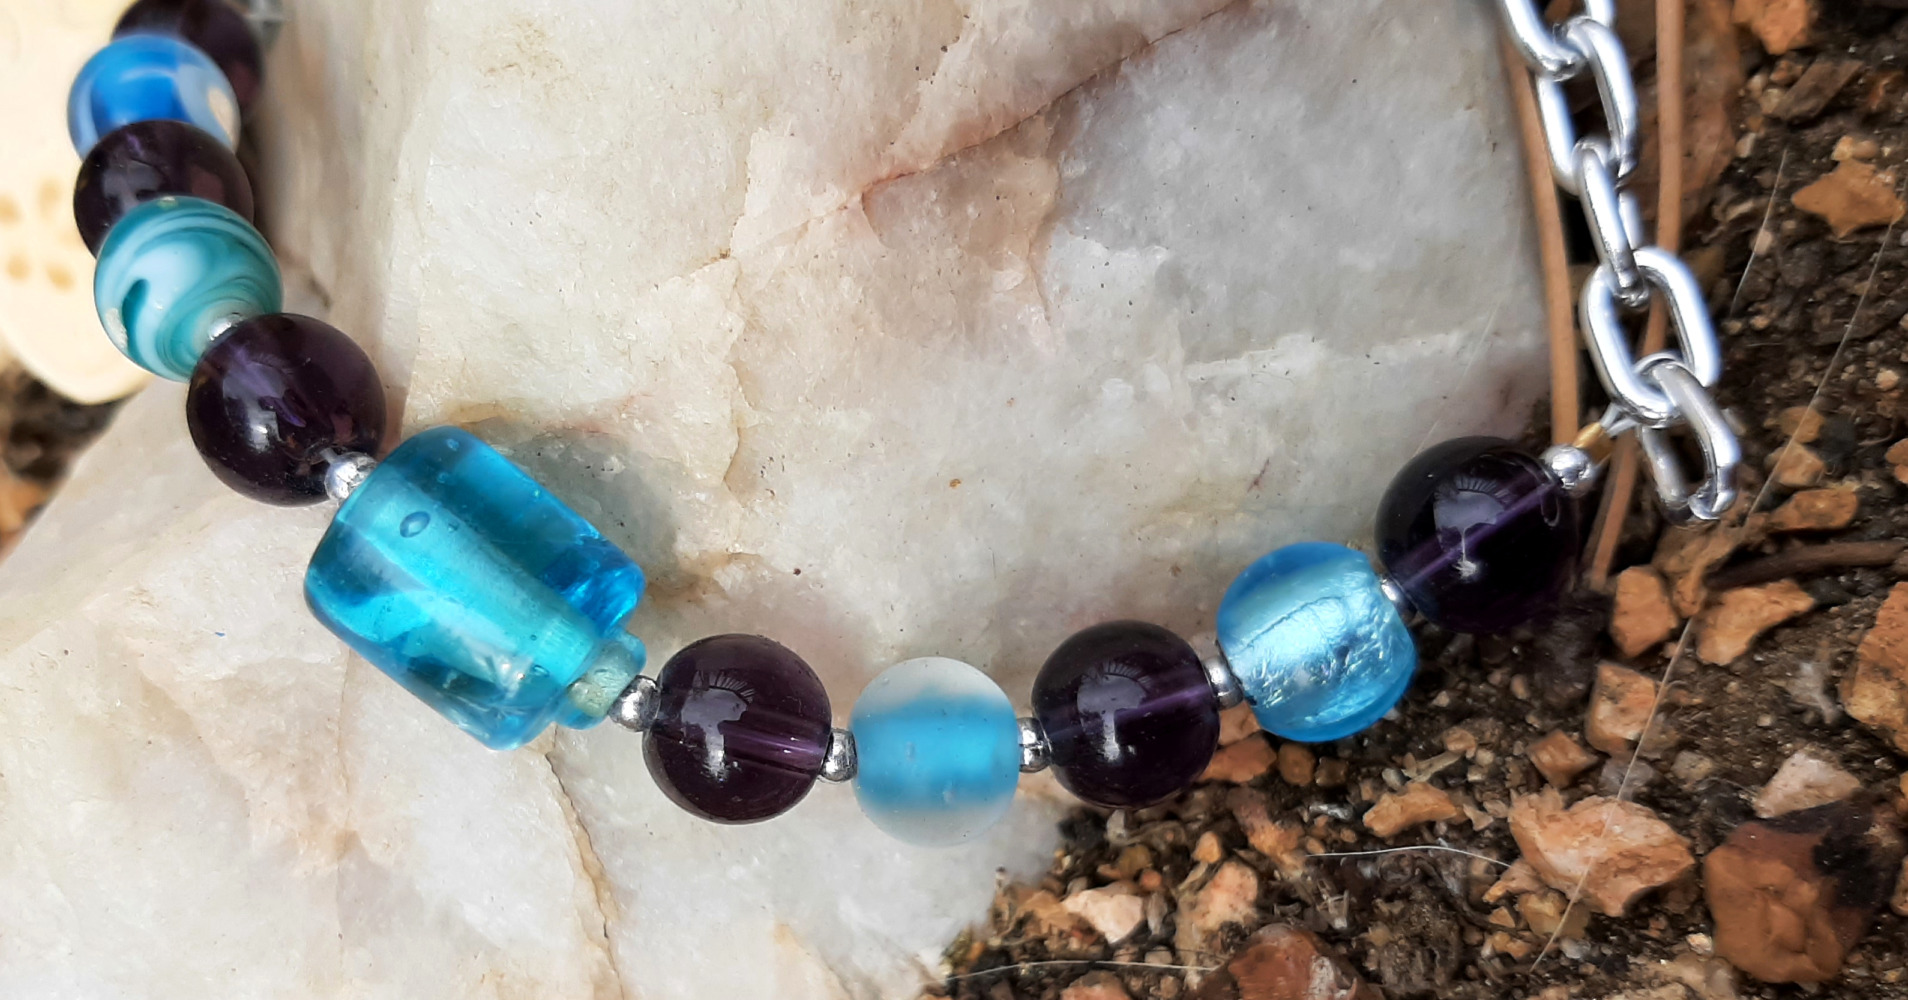 A close view of some of the beads. They alternate between teal and purple; most are spheres, but one slightly larger teal one is a cylinder. Tiny silver-colored beads separate the larger ones.